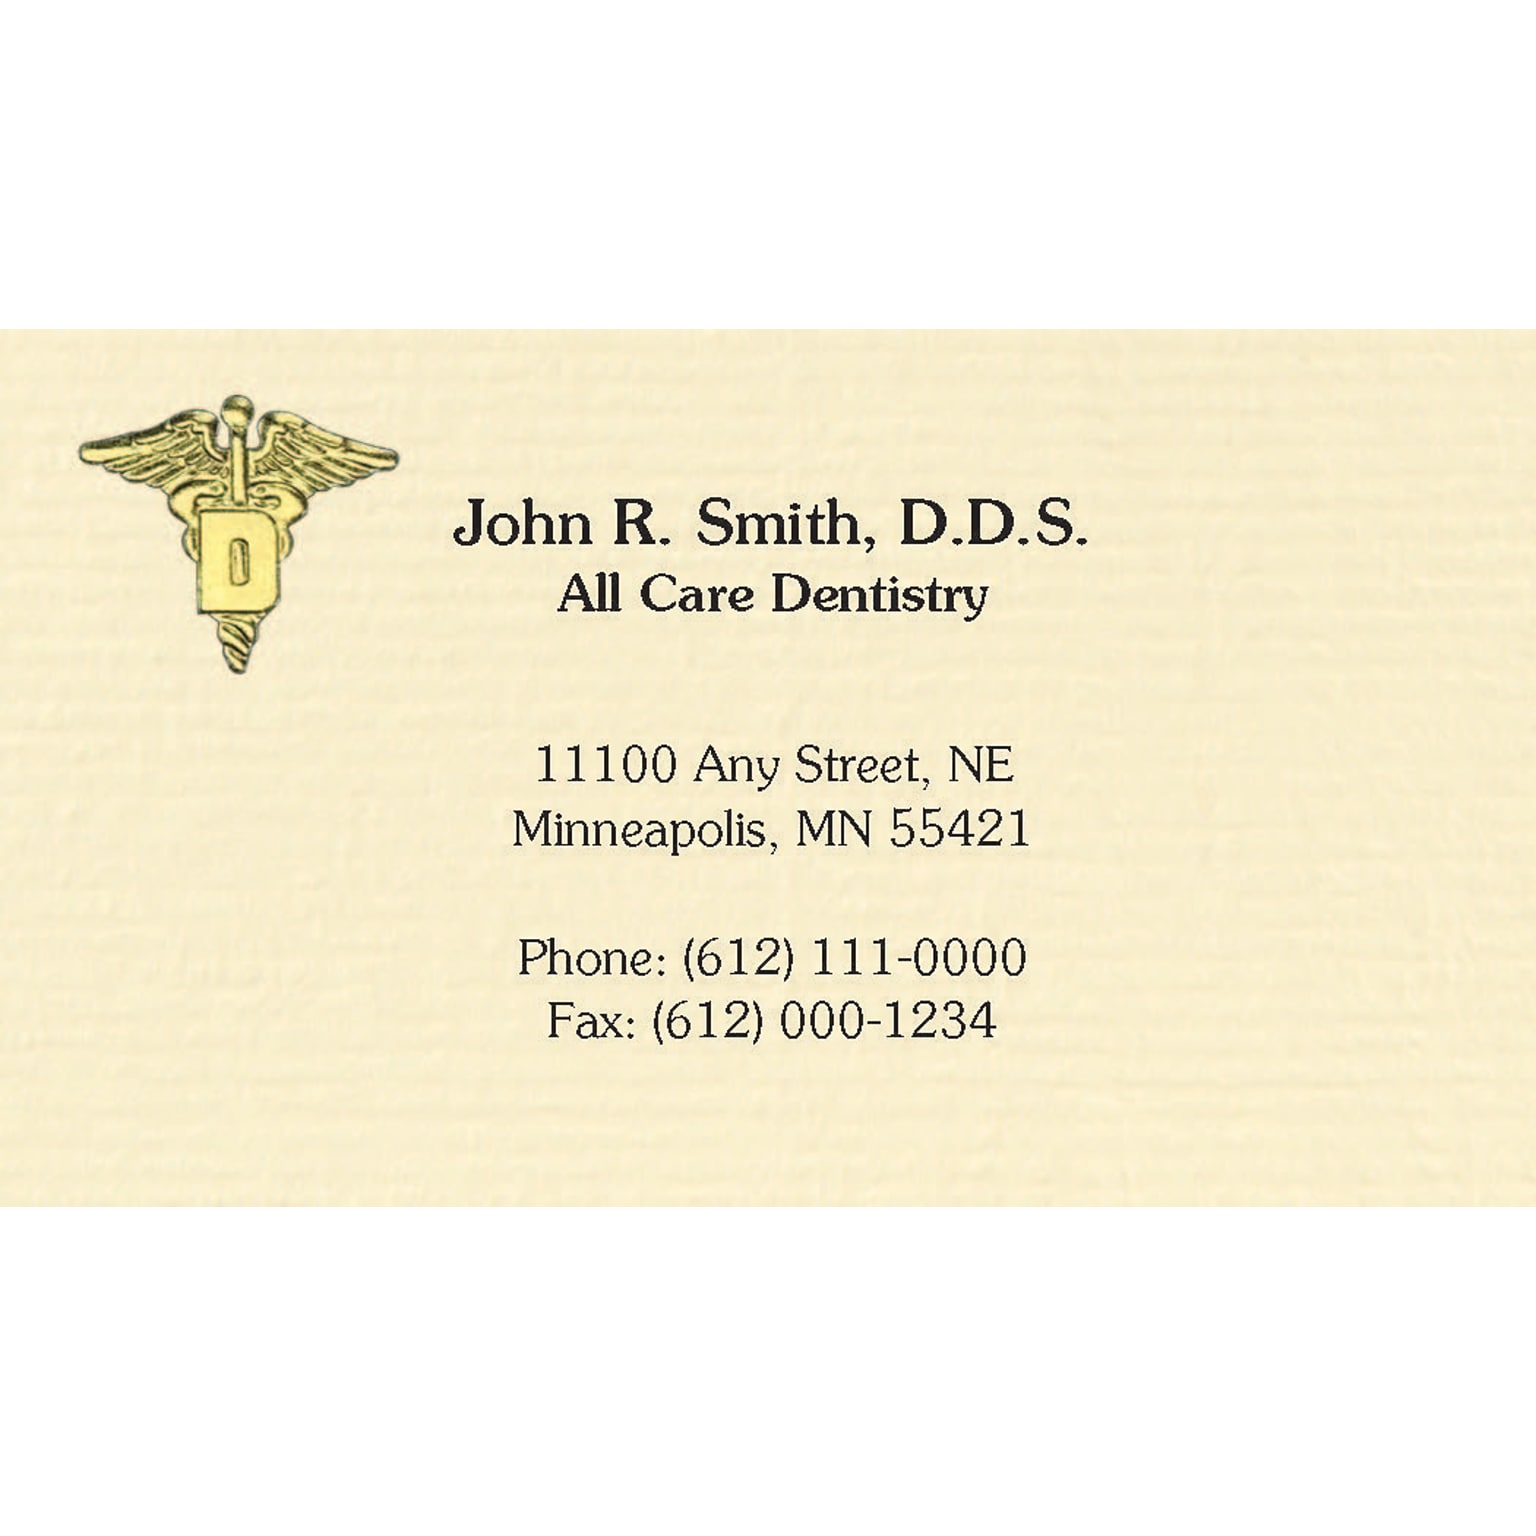 Custom Gold Foil Embossed Business Cards, CLASSIC® Ivory Laid 80#, Raised Ink, 1 Standard Ink, 1-Sided, Logo 203, 250/PK